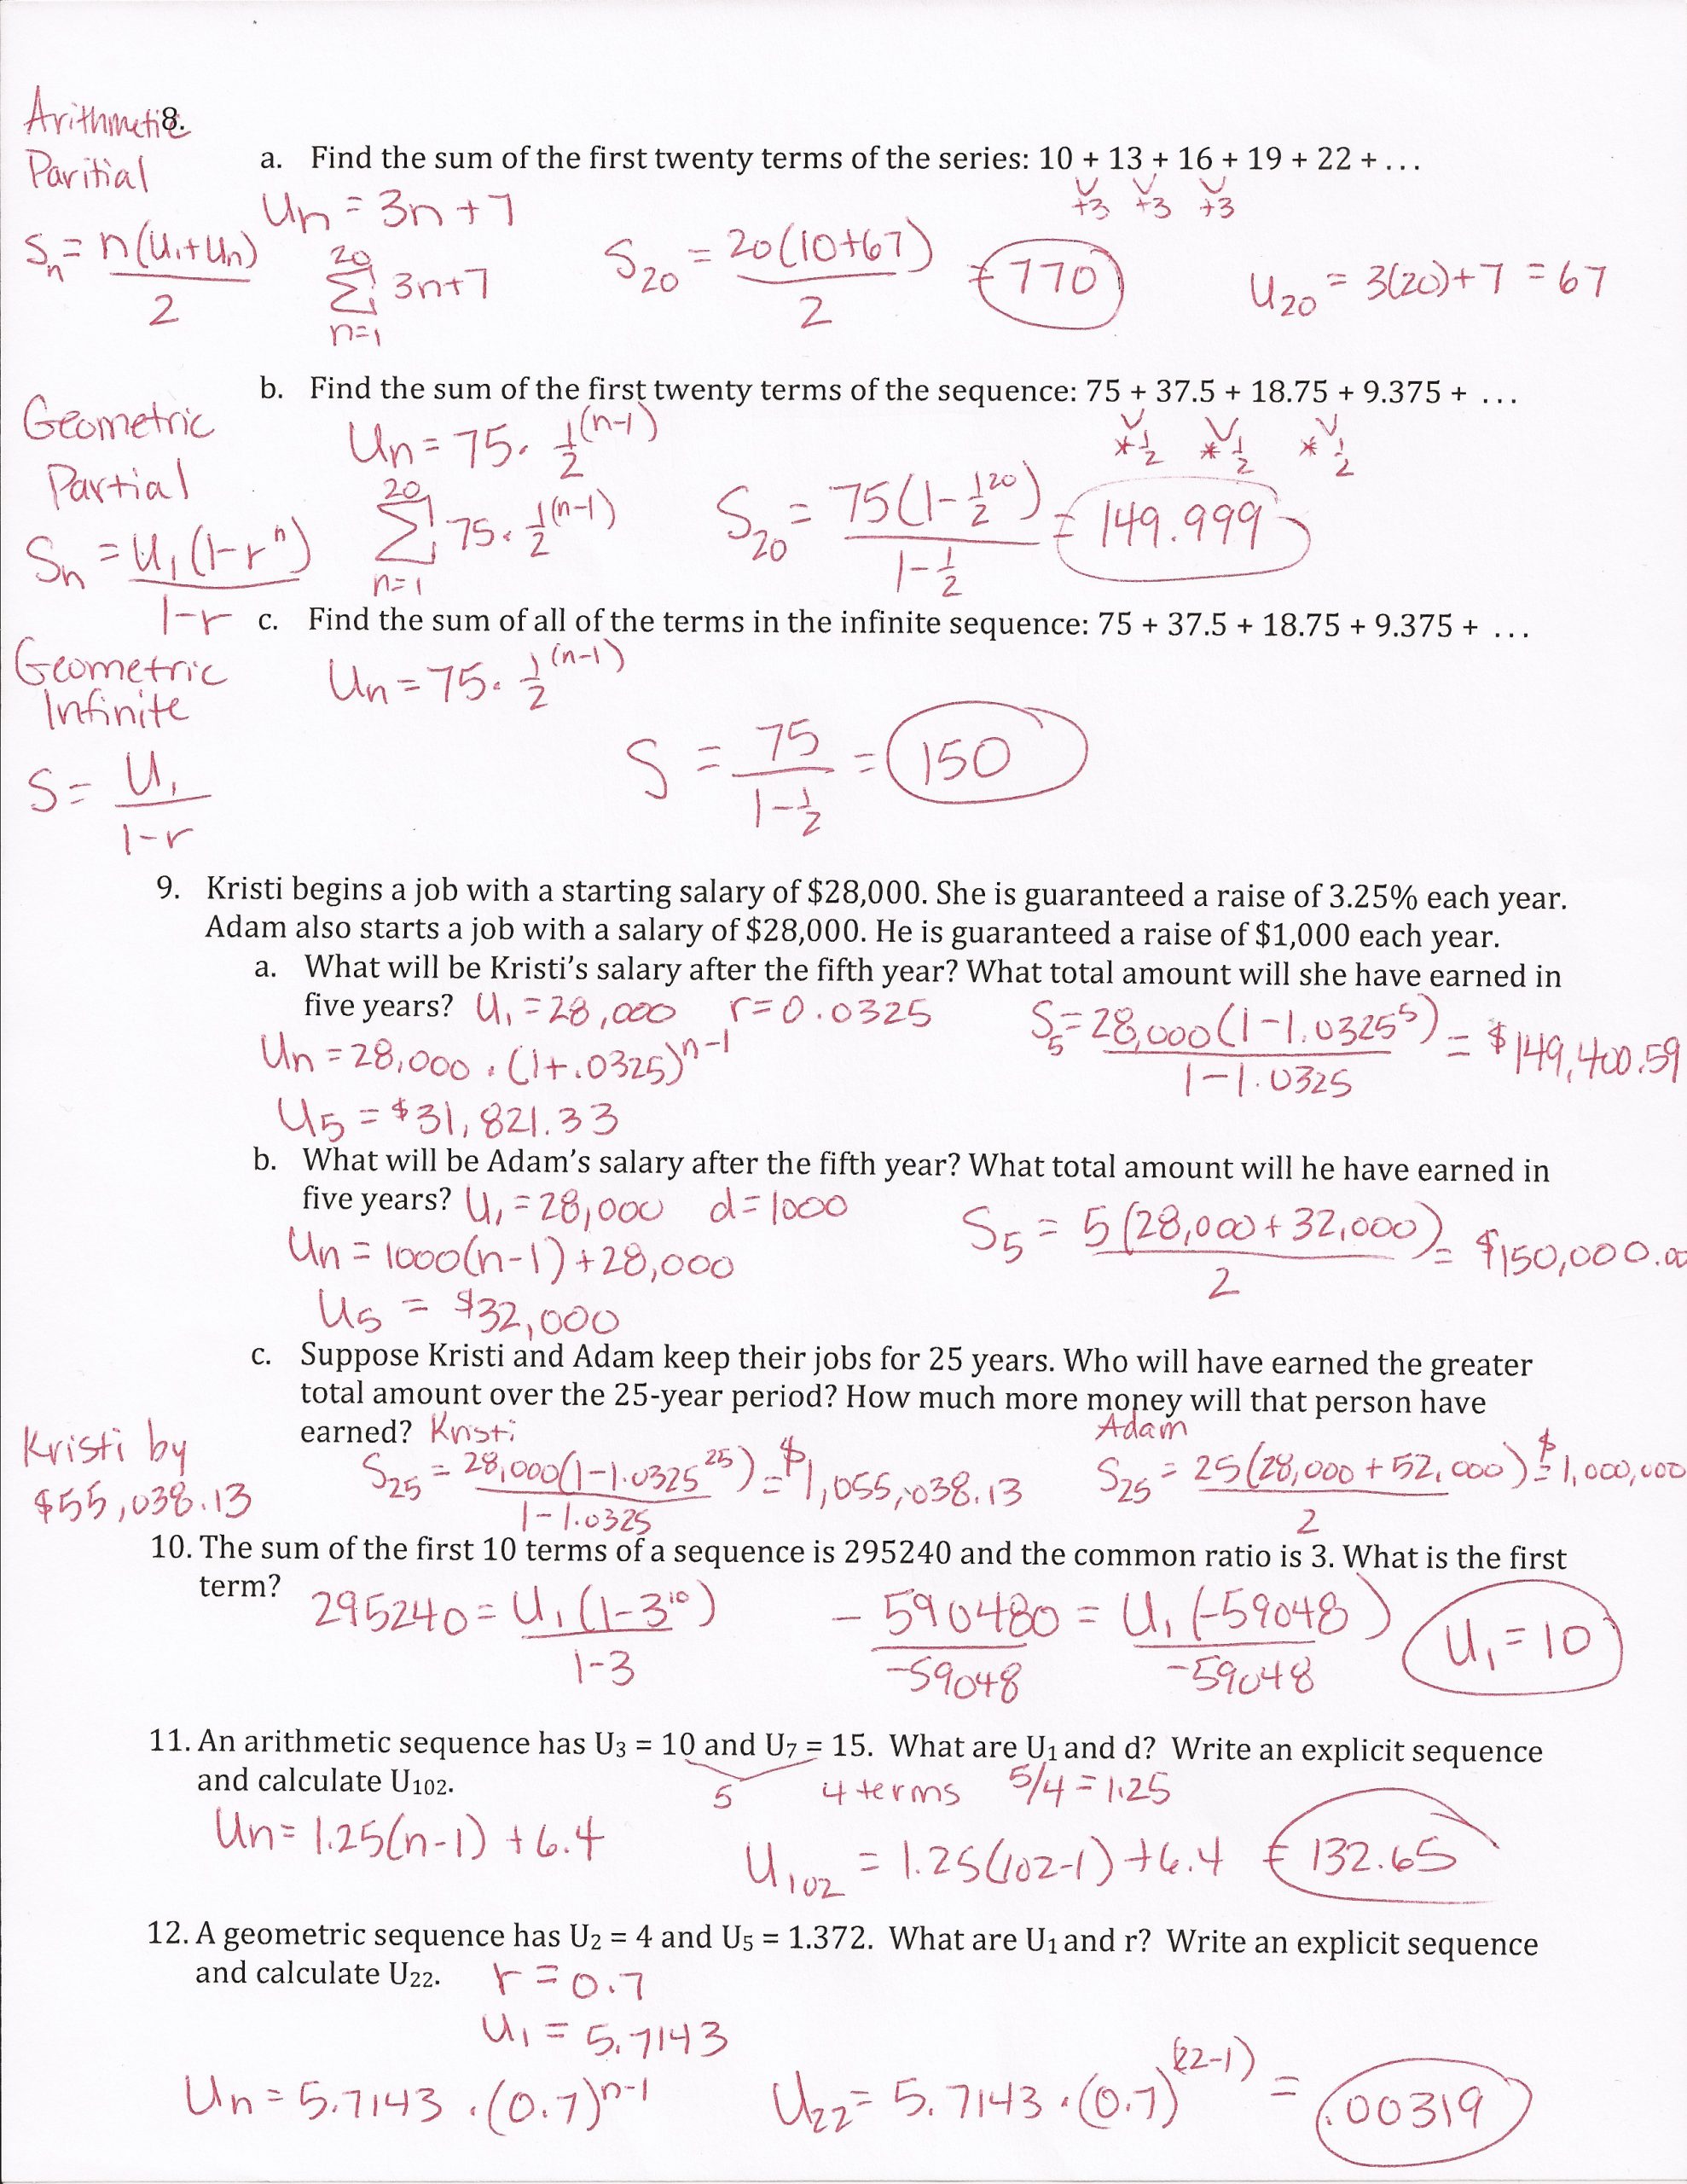 Arithmetic Sequence Worksheet Answers Arithmetic Series Worksheet with Answers Pdf